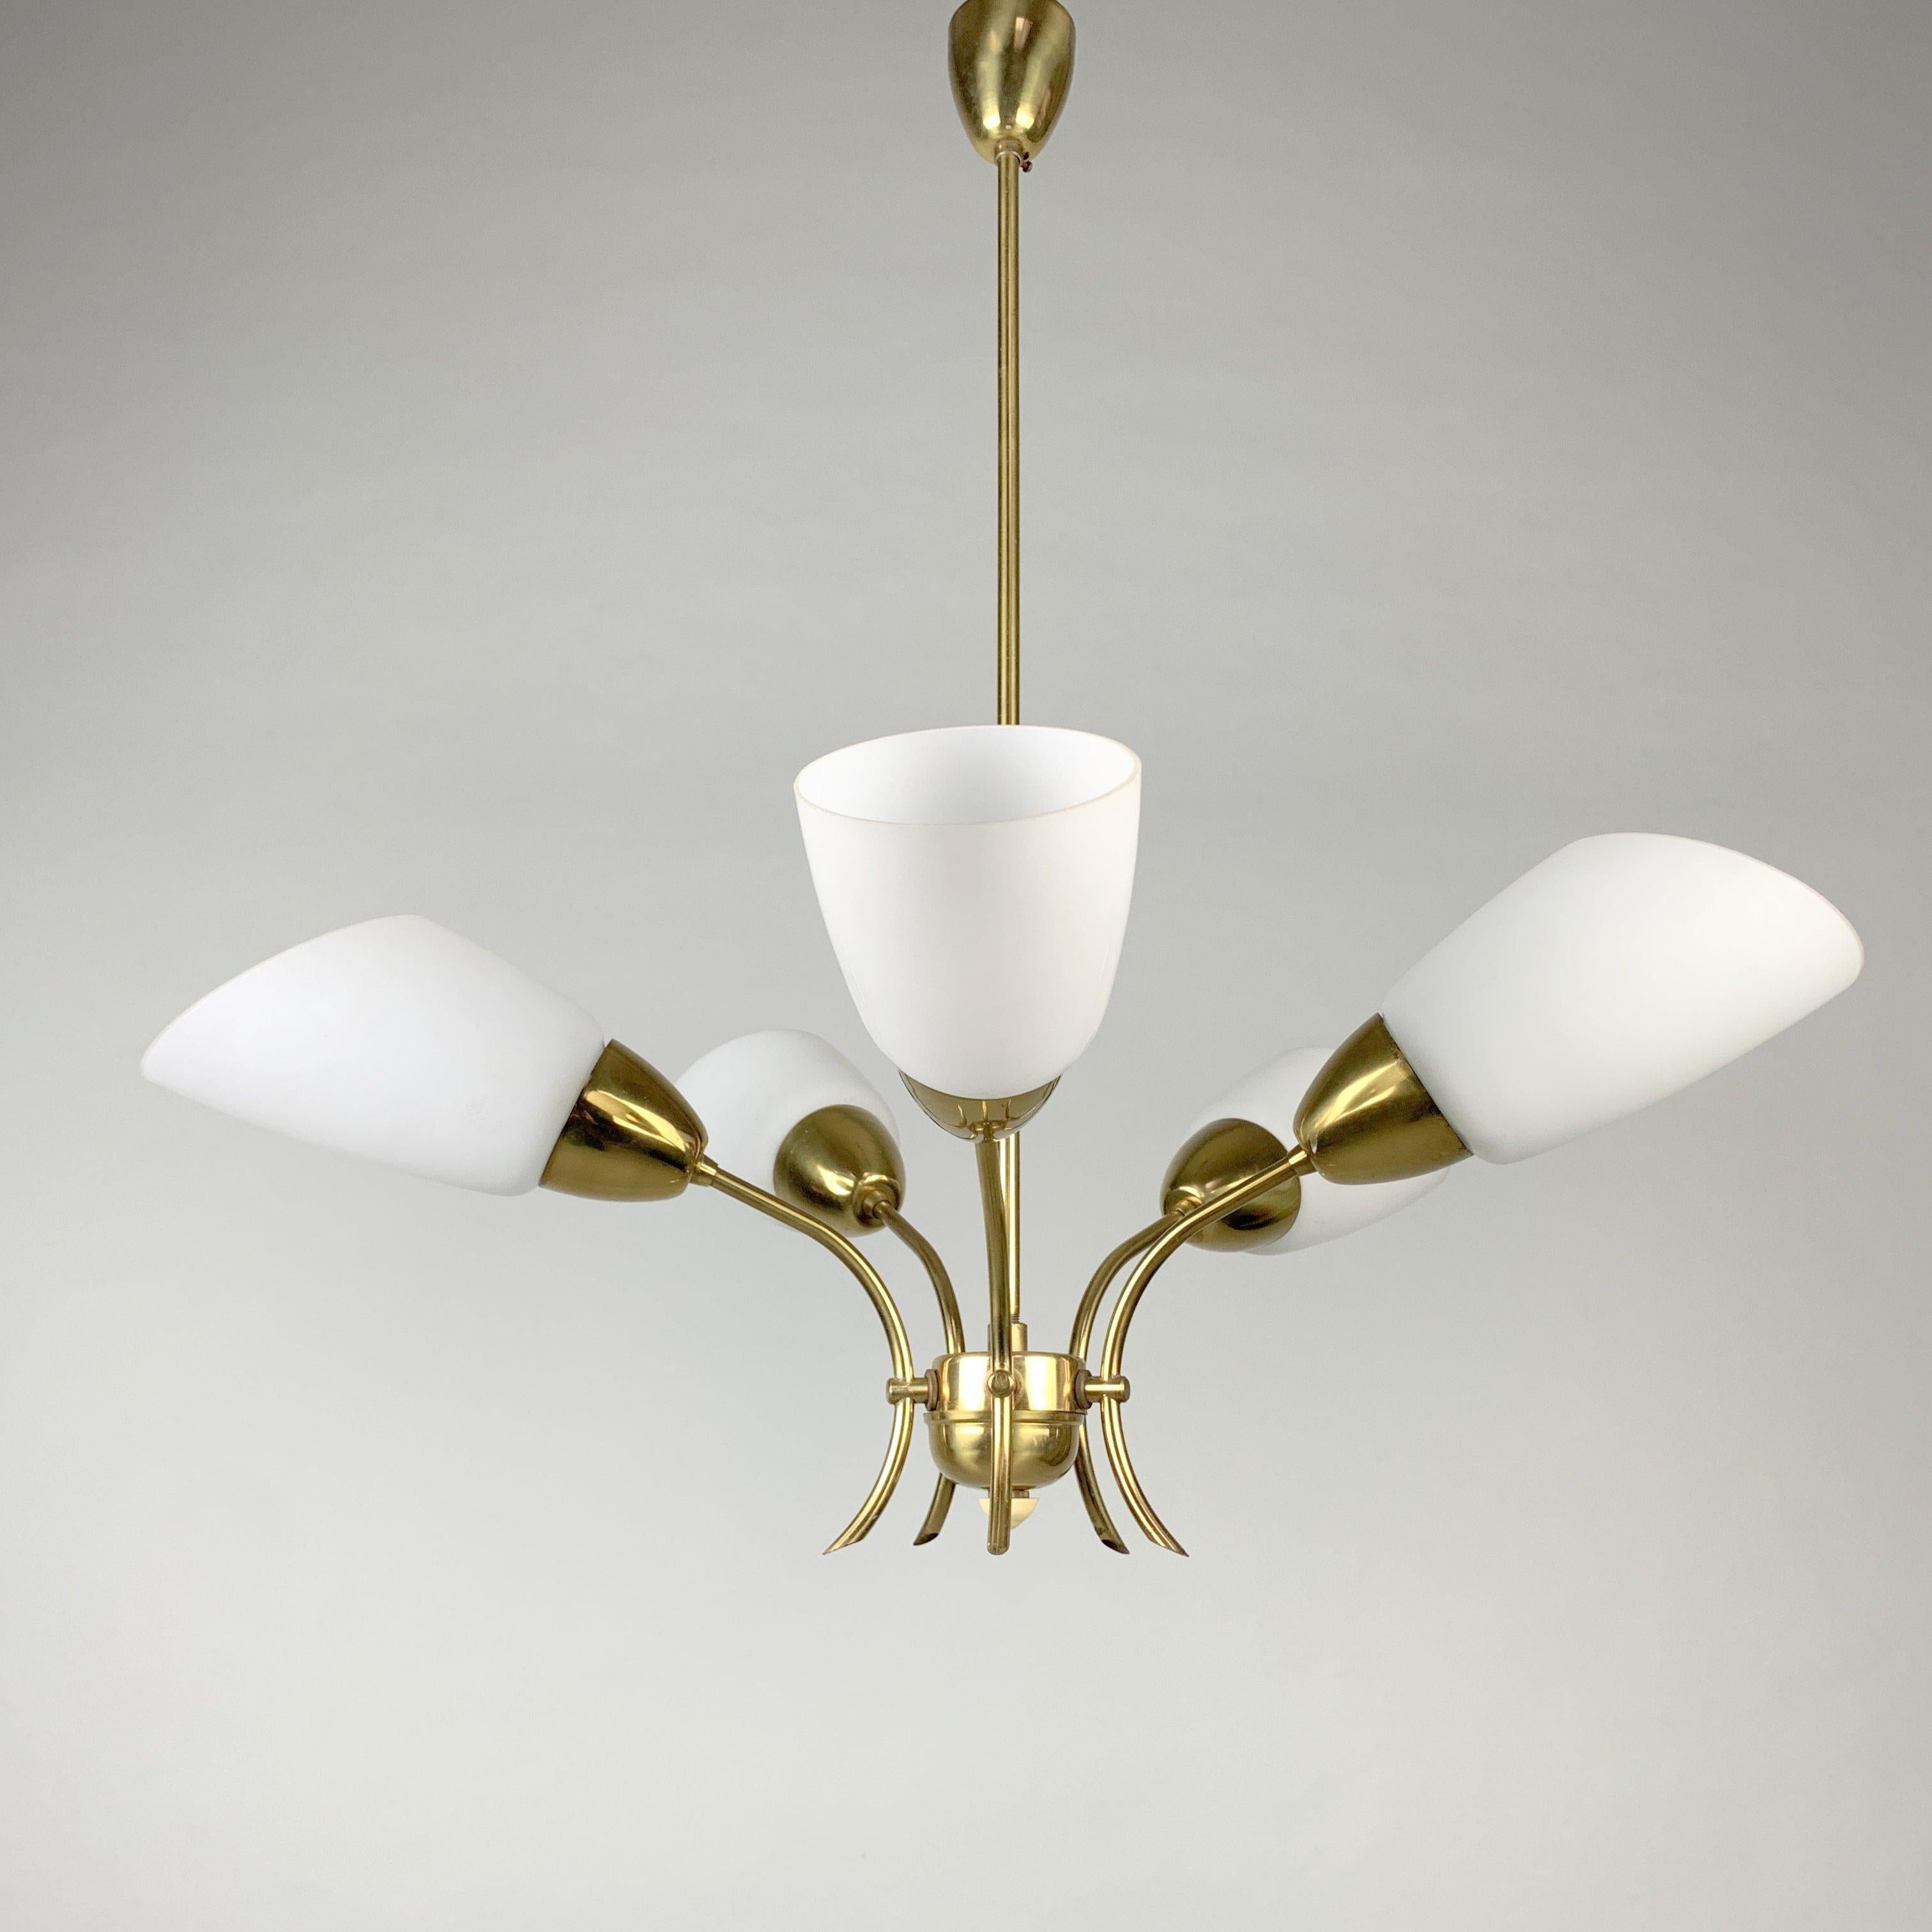 Vintage brass and white glass, five-arm chandelier from former Czechoslovakia. Very good original condition.